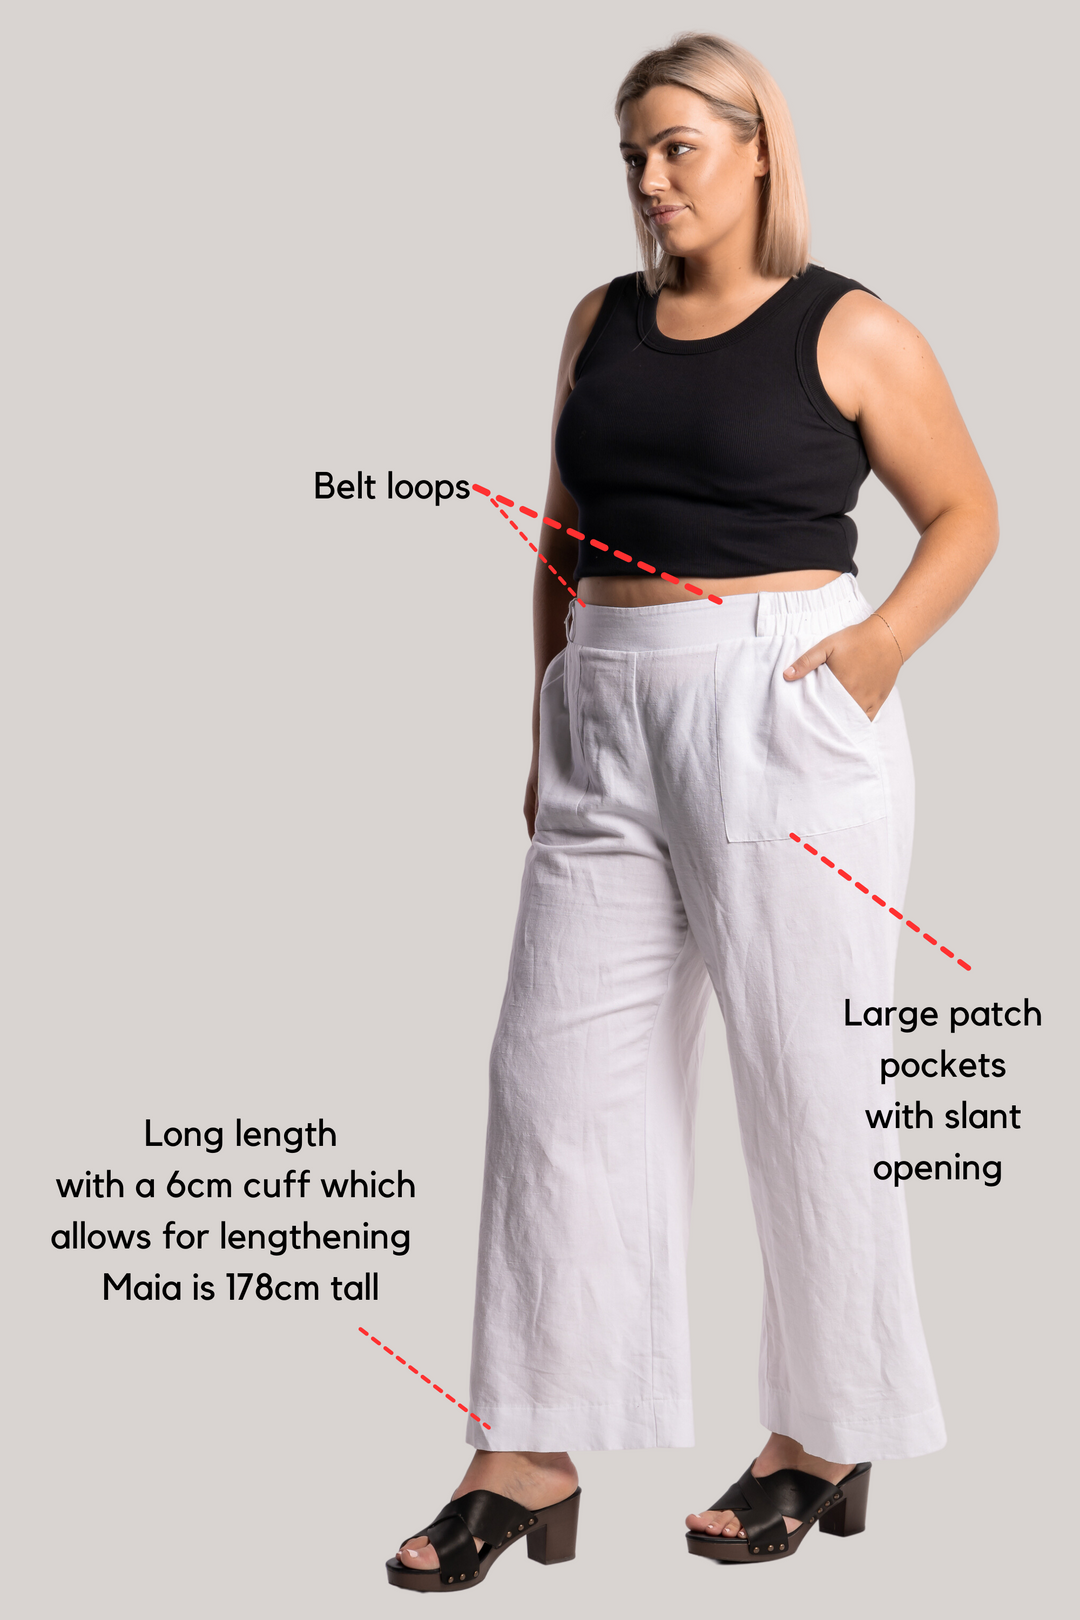 Here Comes The Sun Wide Leg Linen Pant - White